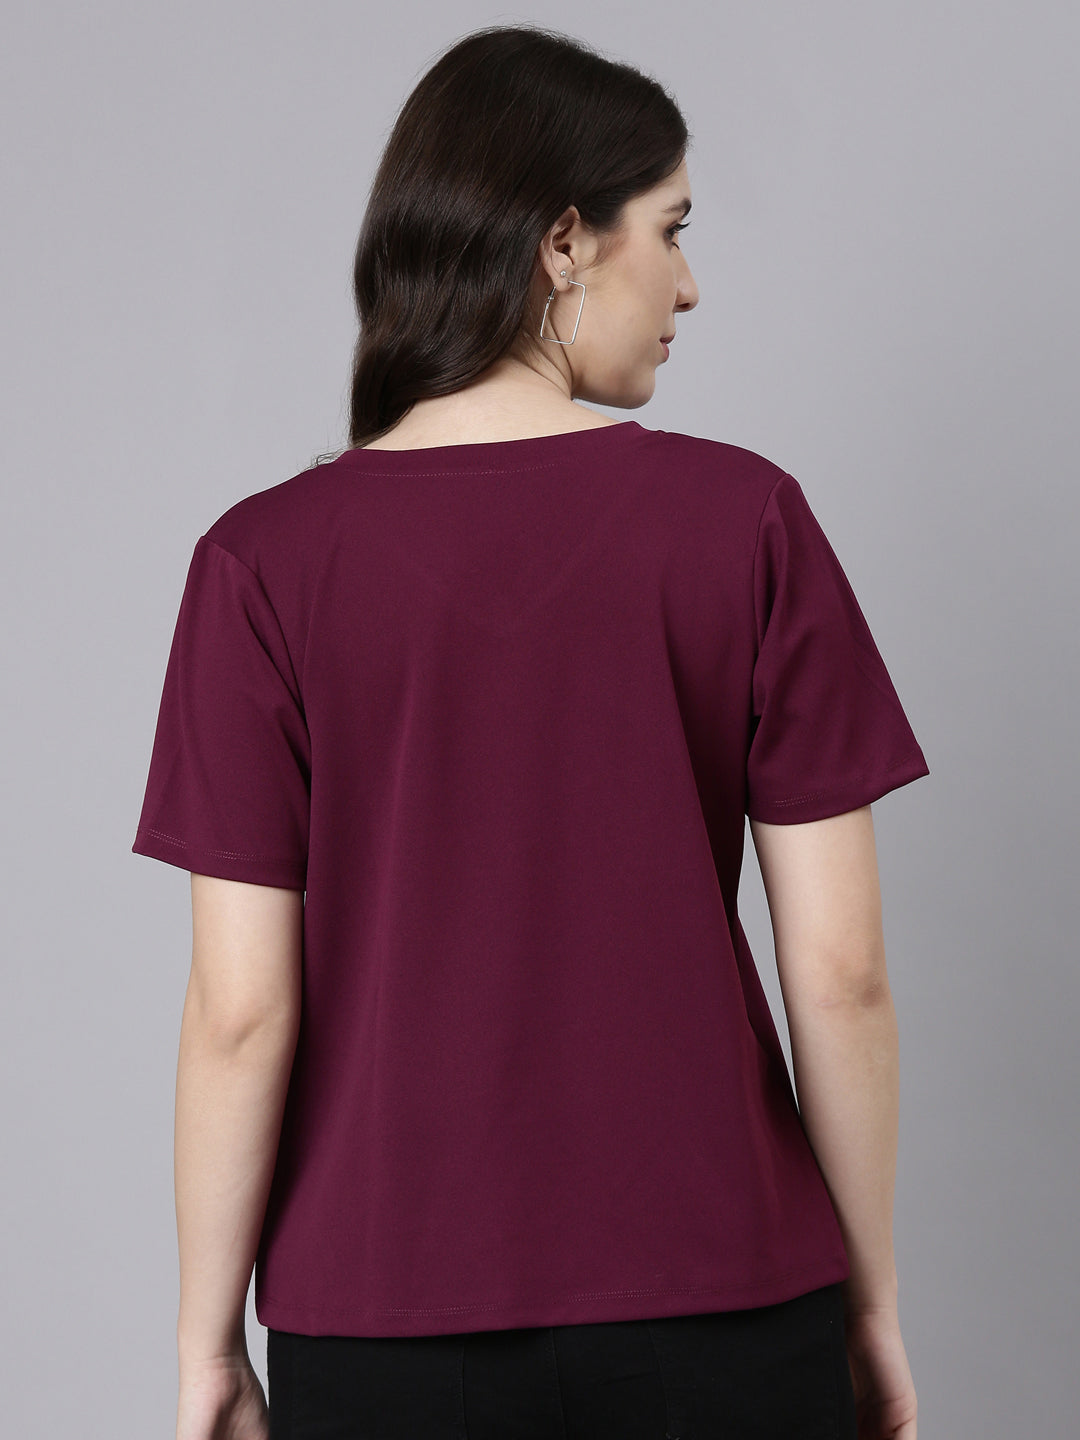 Buy Stylish Half Sleeves Cotton T-Shirt For Women at Best Price in